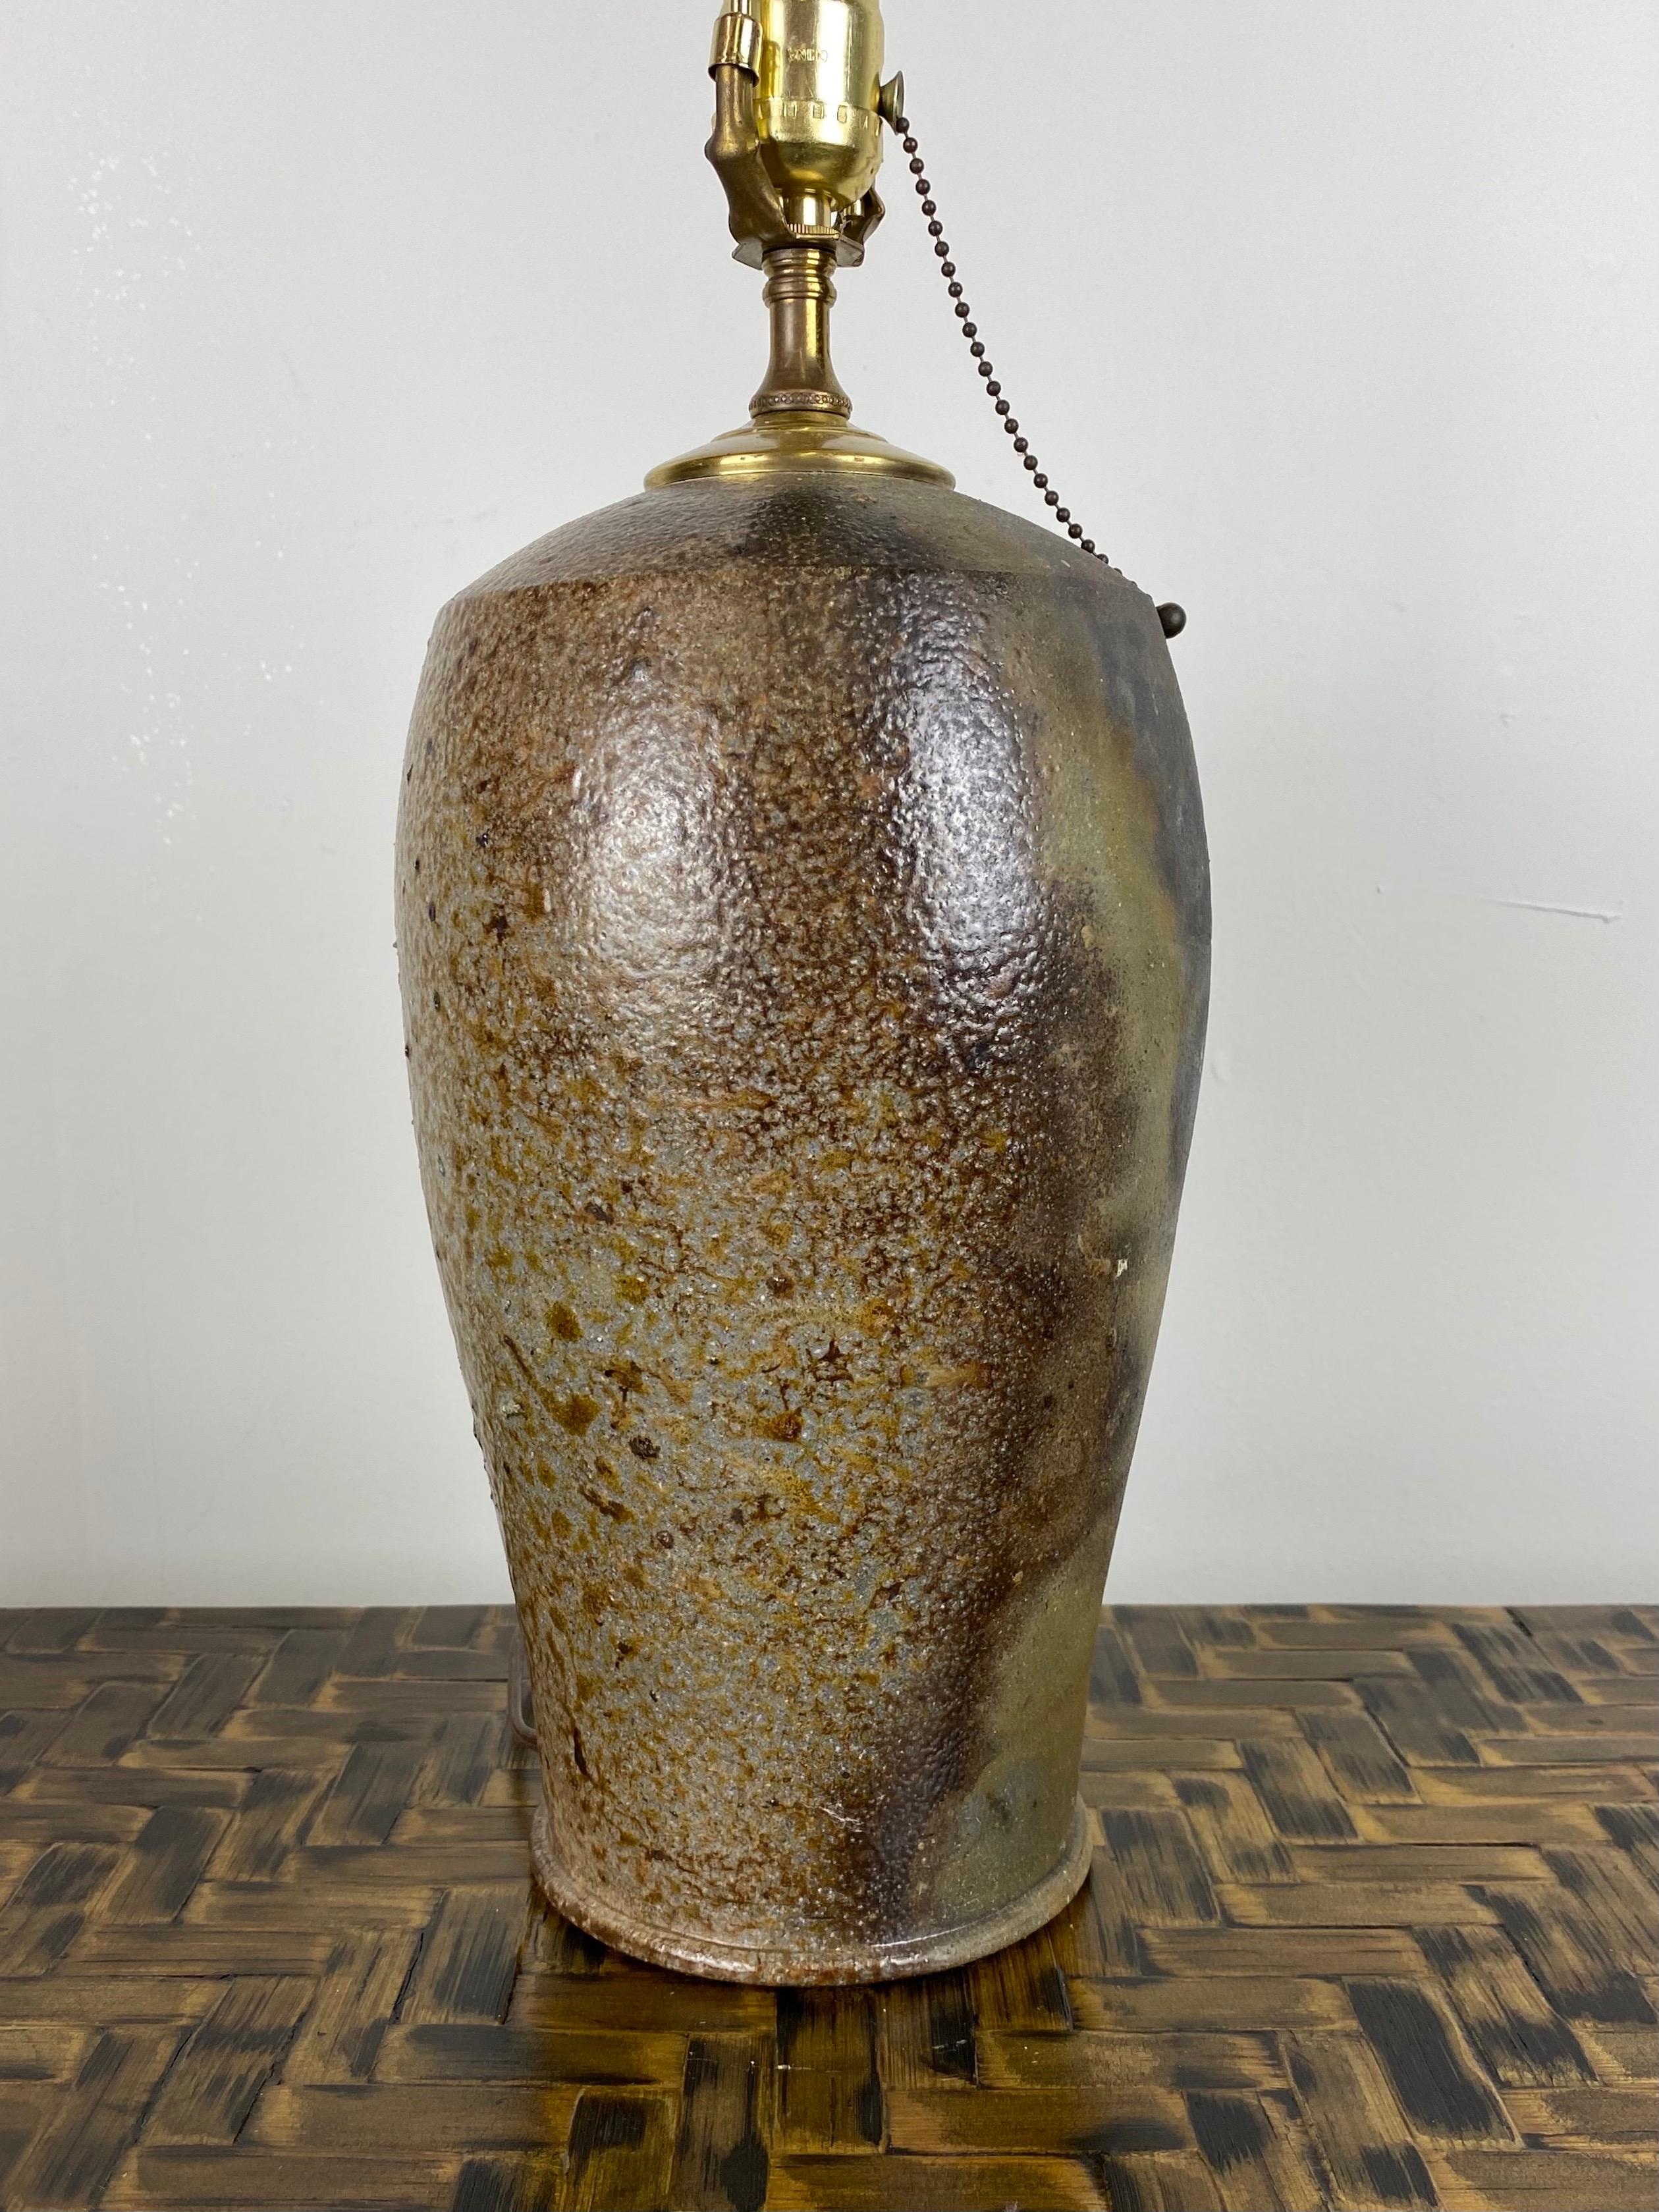 This unique pottery table lamp has beautiful earth tones throughout. Highlights of green and grey with some gloss and some matte finish offer great depth to this piece.